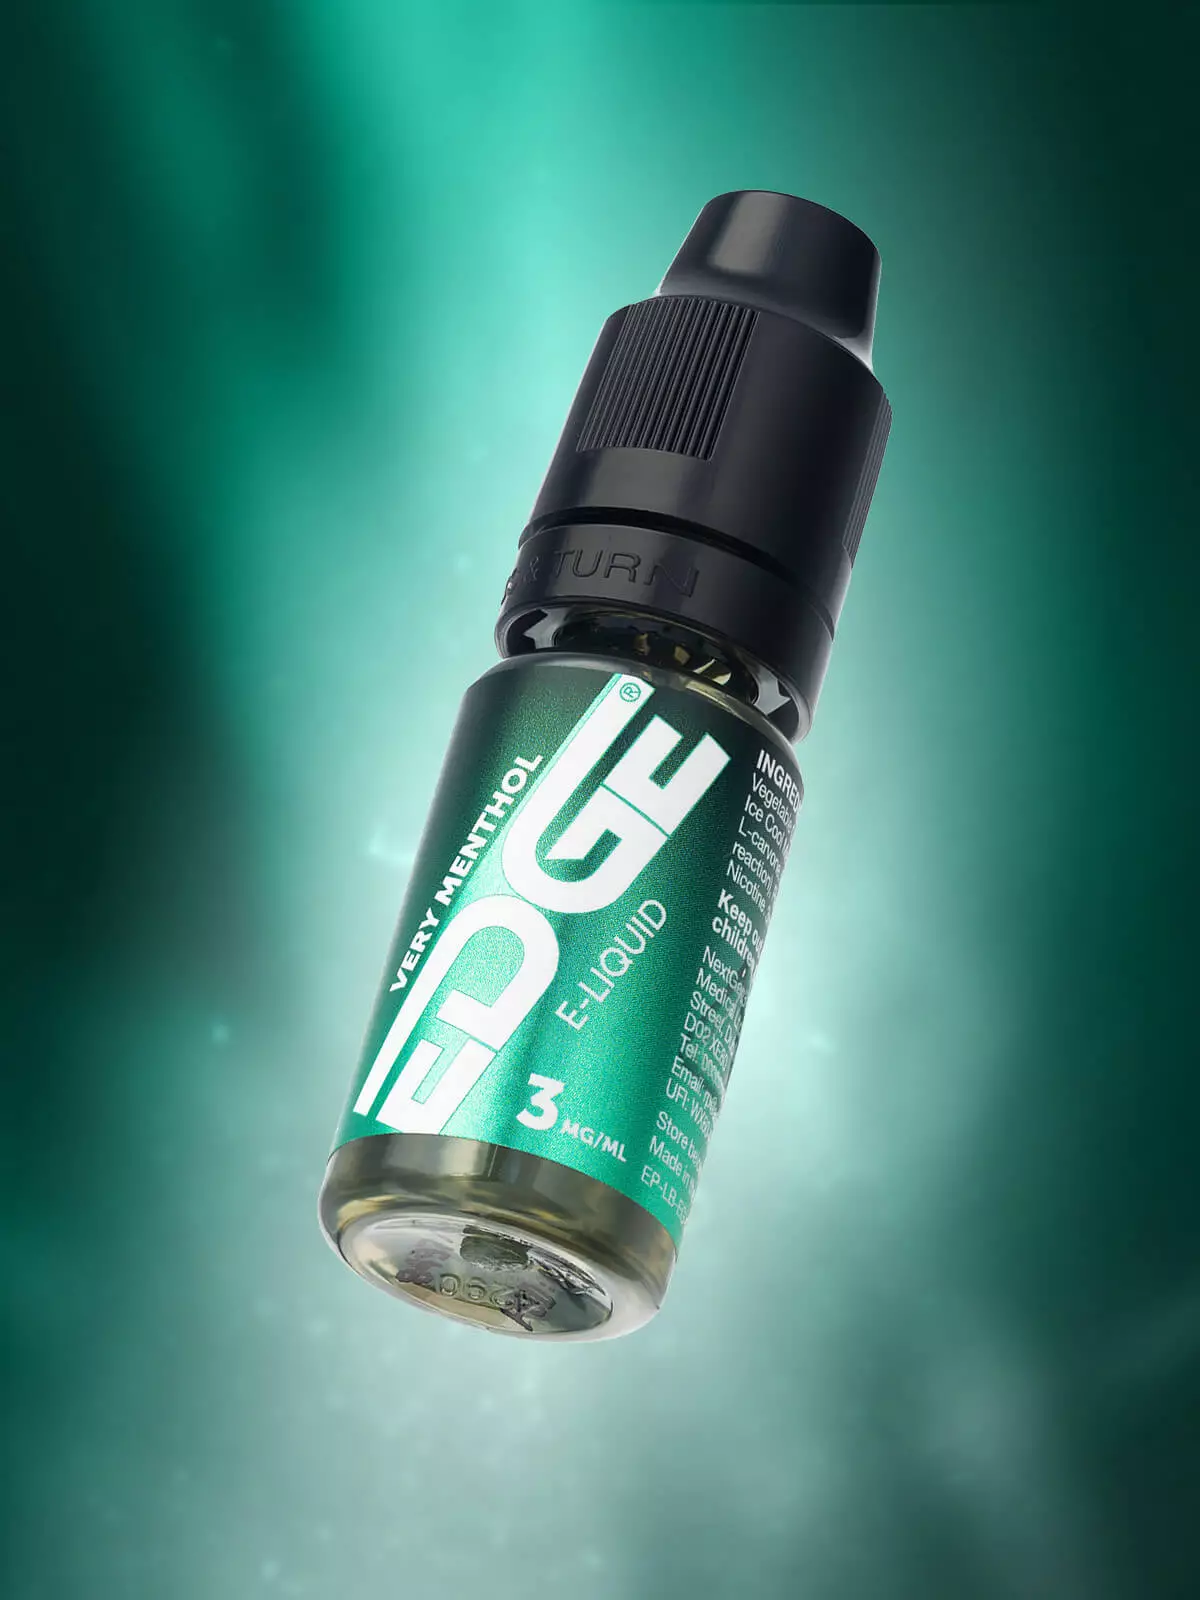 A bottle of Very Menthol e-liquid by Edge in front of a green background